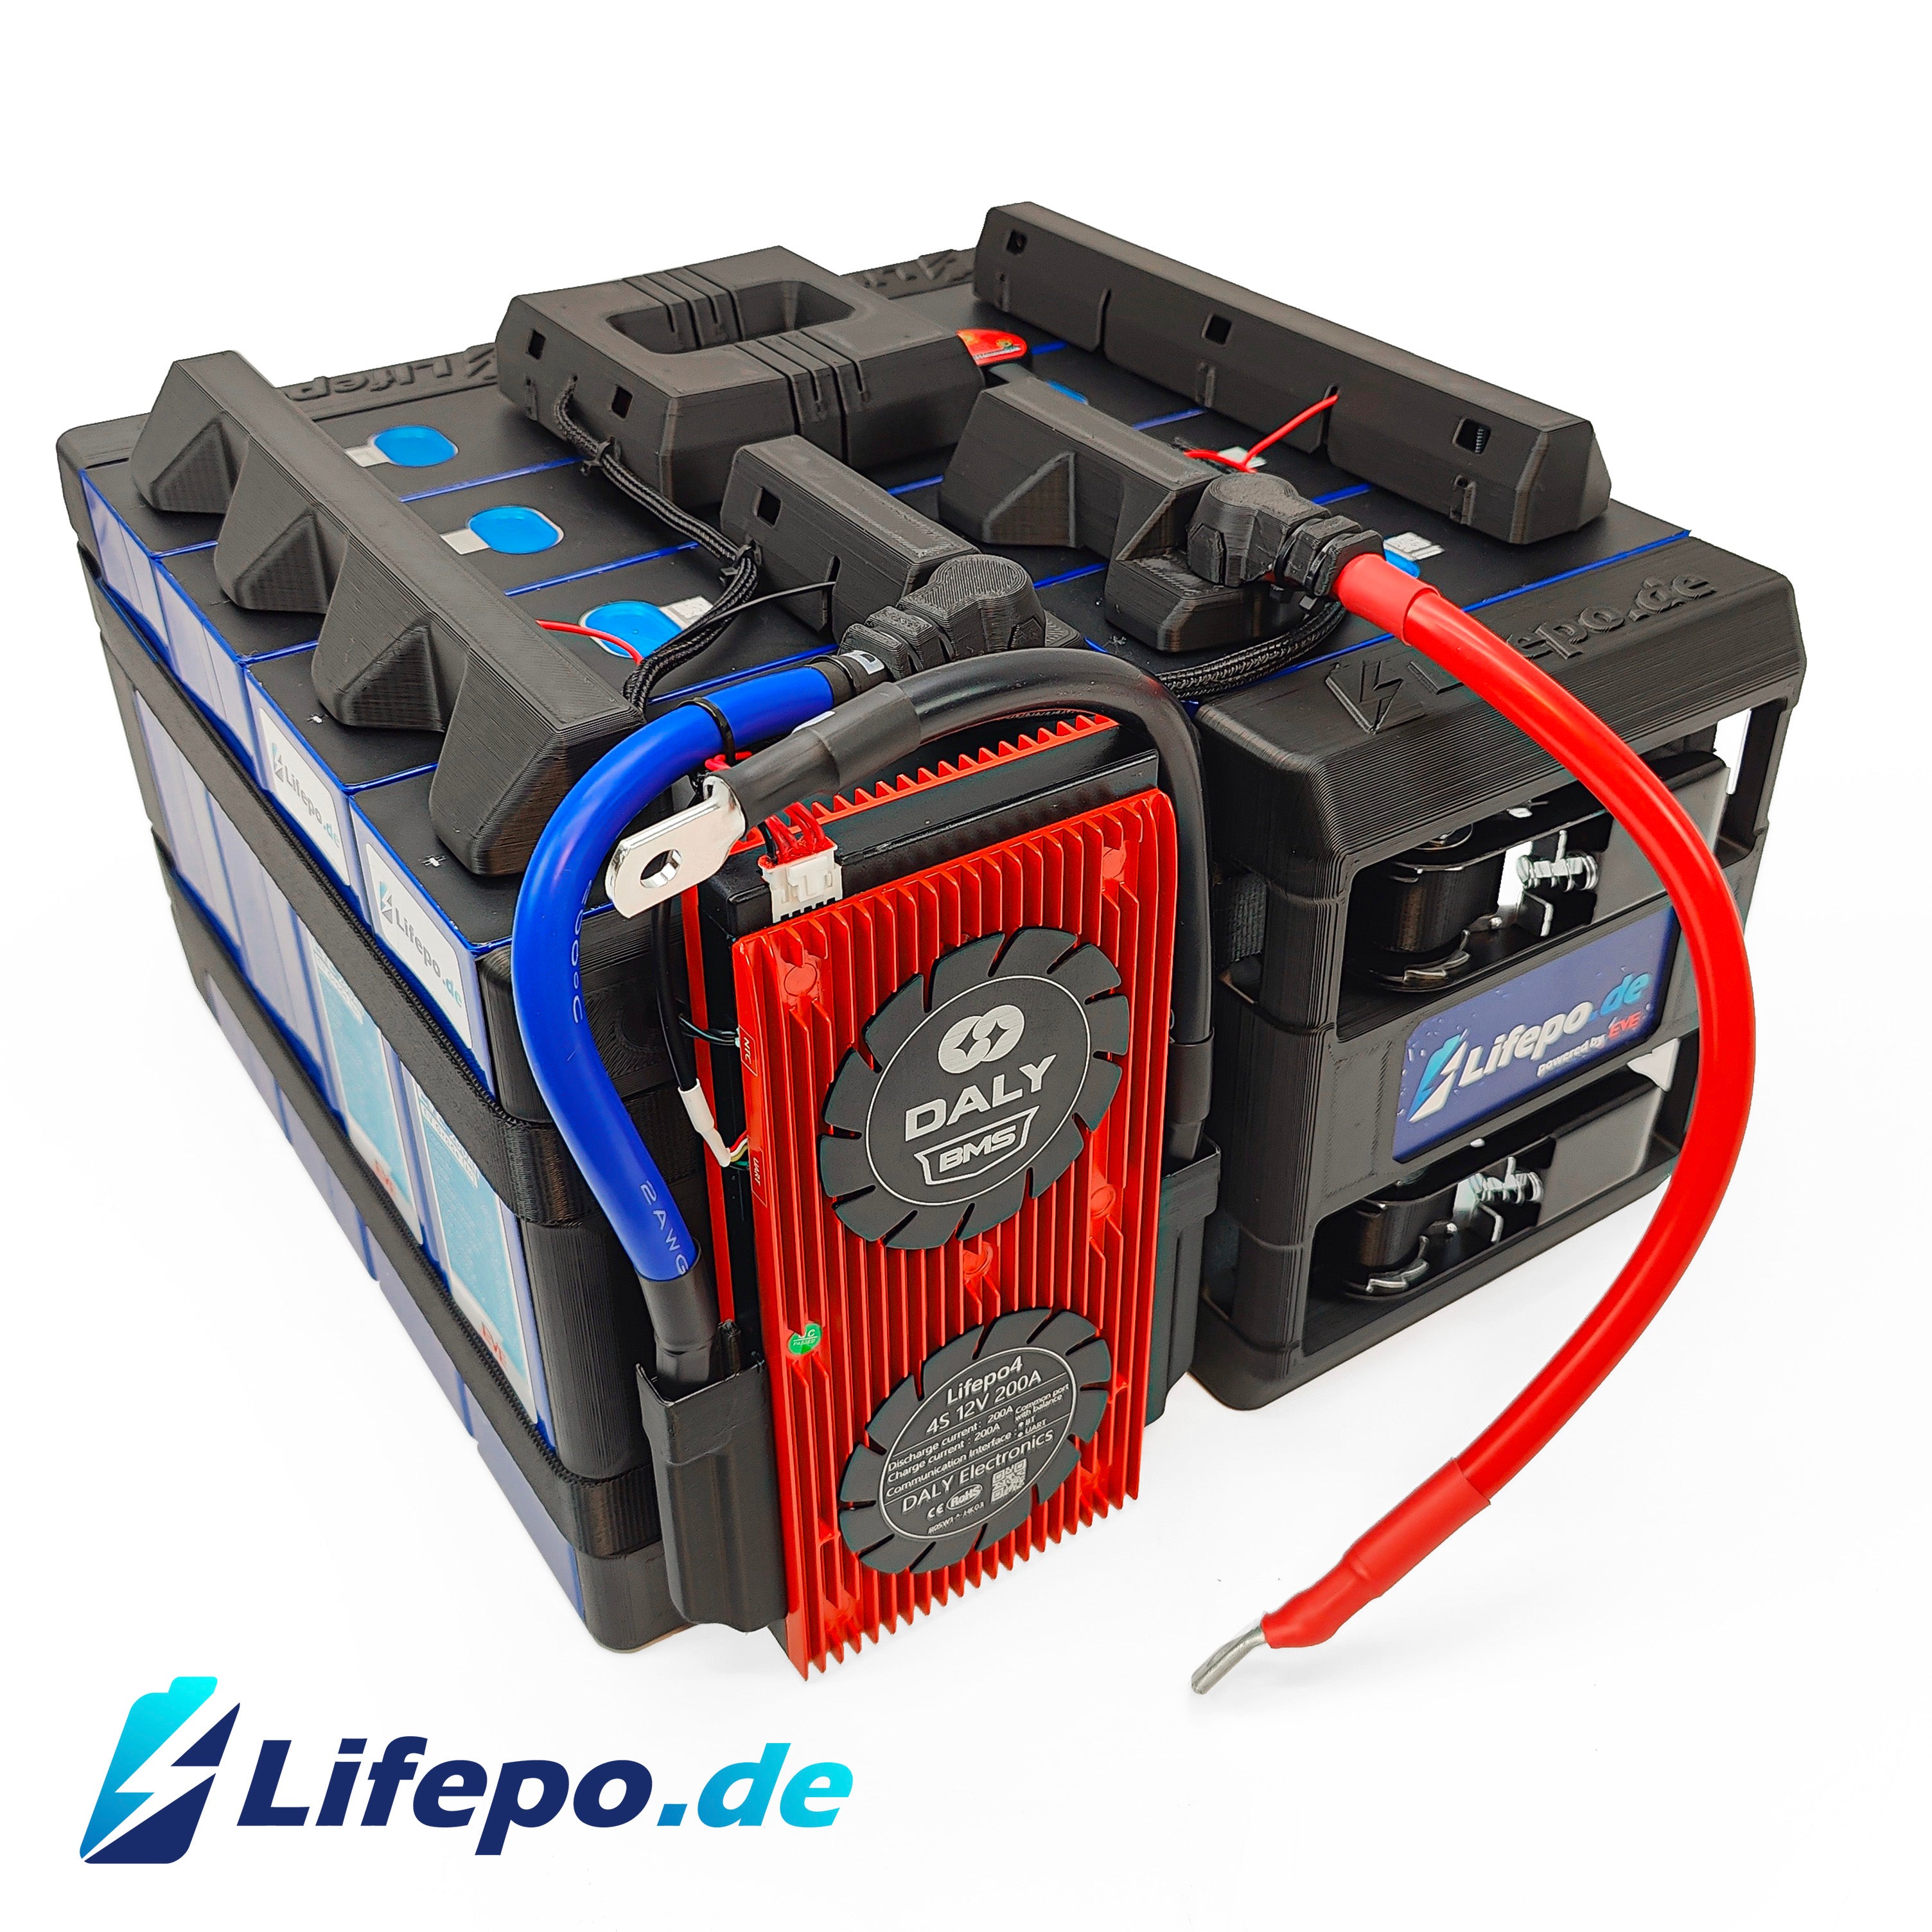 12v 560Ah Lifepo4 battery system with EVE Grade A+ 7.17kWh - double row